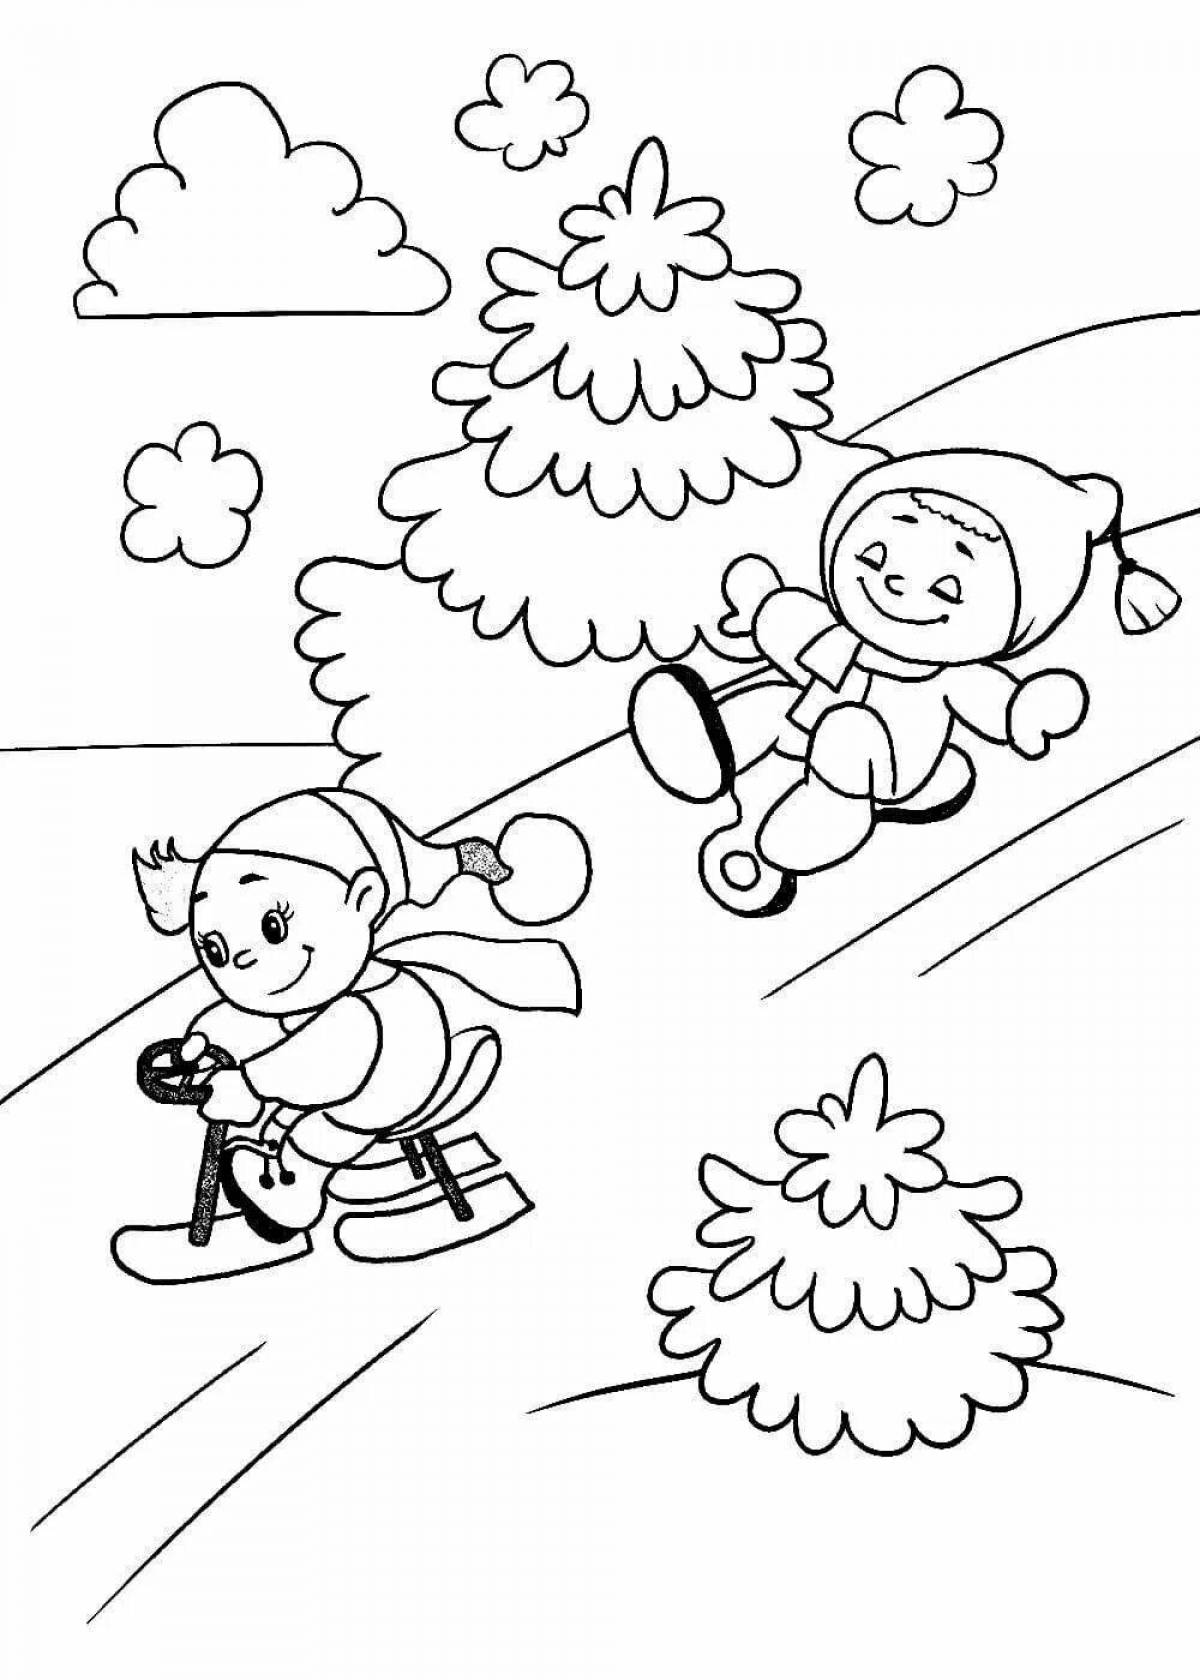 Outstanding winter coloring book for toddlers